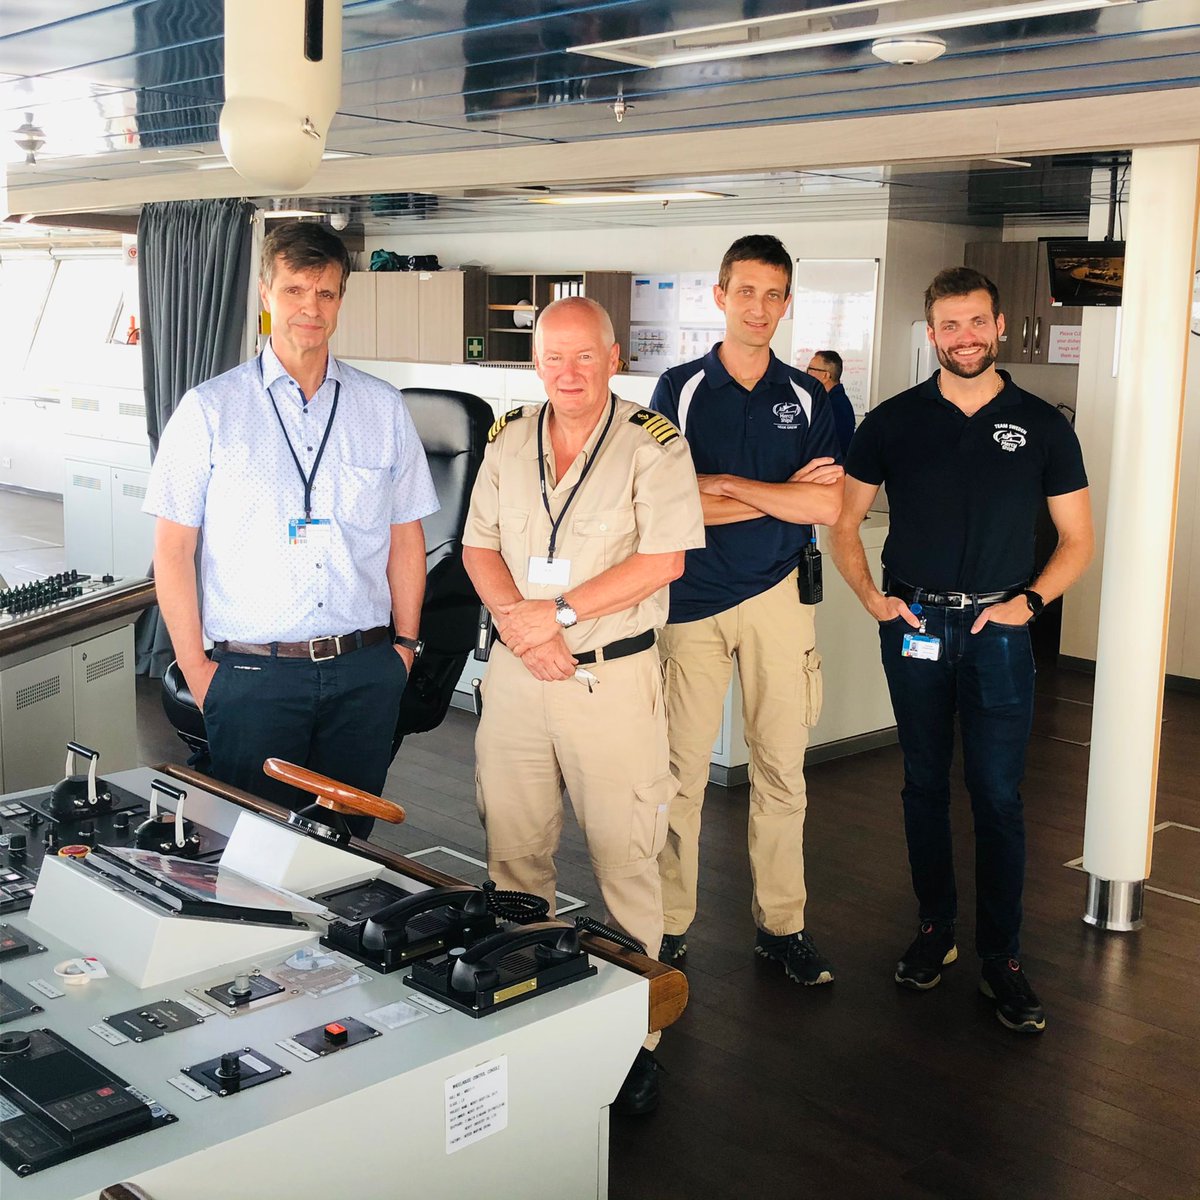 Exciting #news! Instructor Magnus Winberg returns to the incredible hospital ship #GlobalMercy at the beginning of August to deliver top-notch azimuthing propulsion training. Reach out to us at maritime@aboamare.fi to book your own training!

#aboamare #maritimetraining #maritime